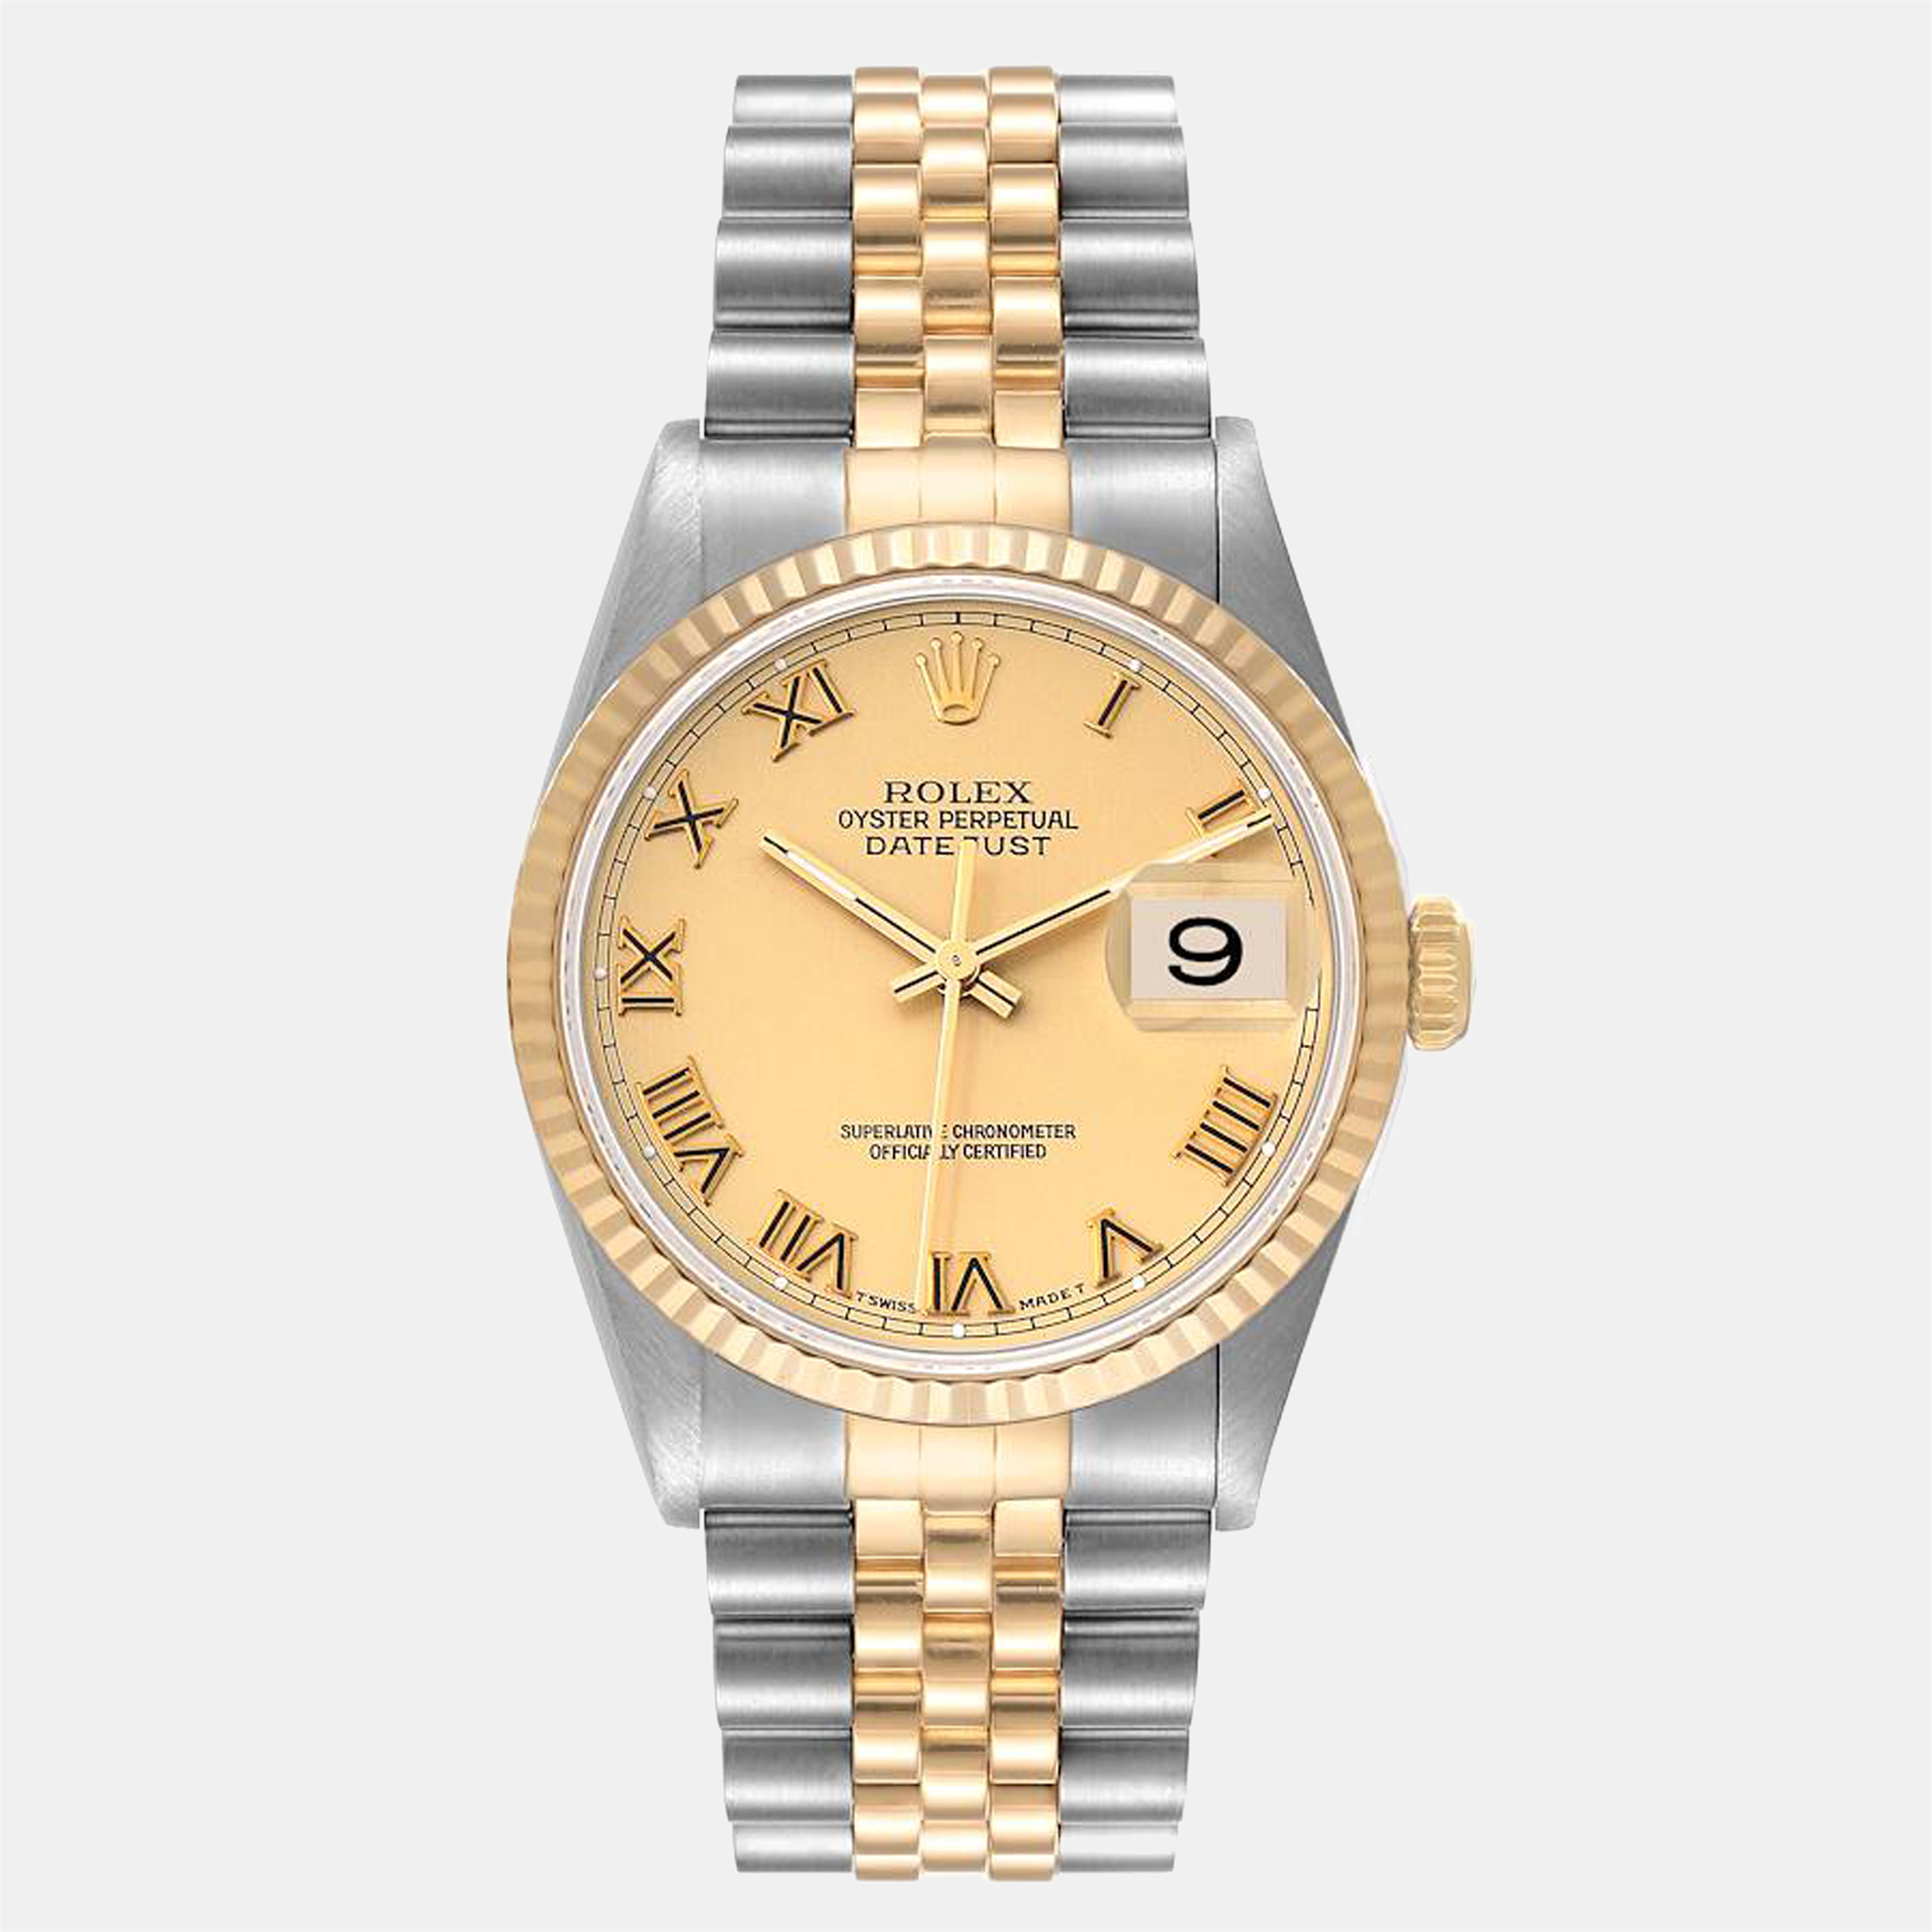 Rolex Champagne 18k Yellow Gold And Stainless Steel Datejust 16233 Automatic Men's Wristwatch 36 Mm